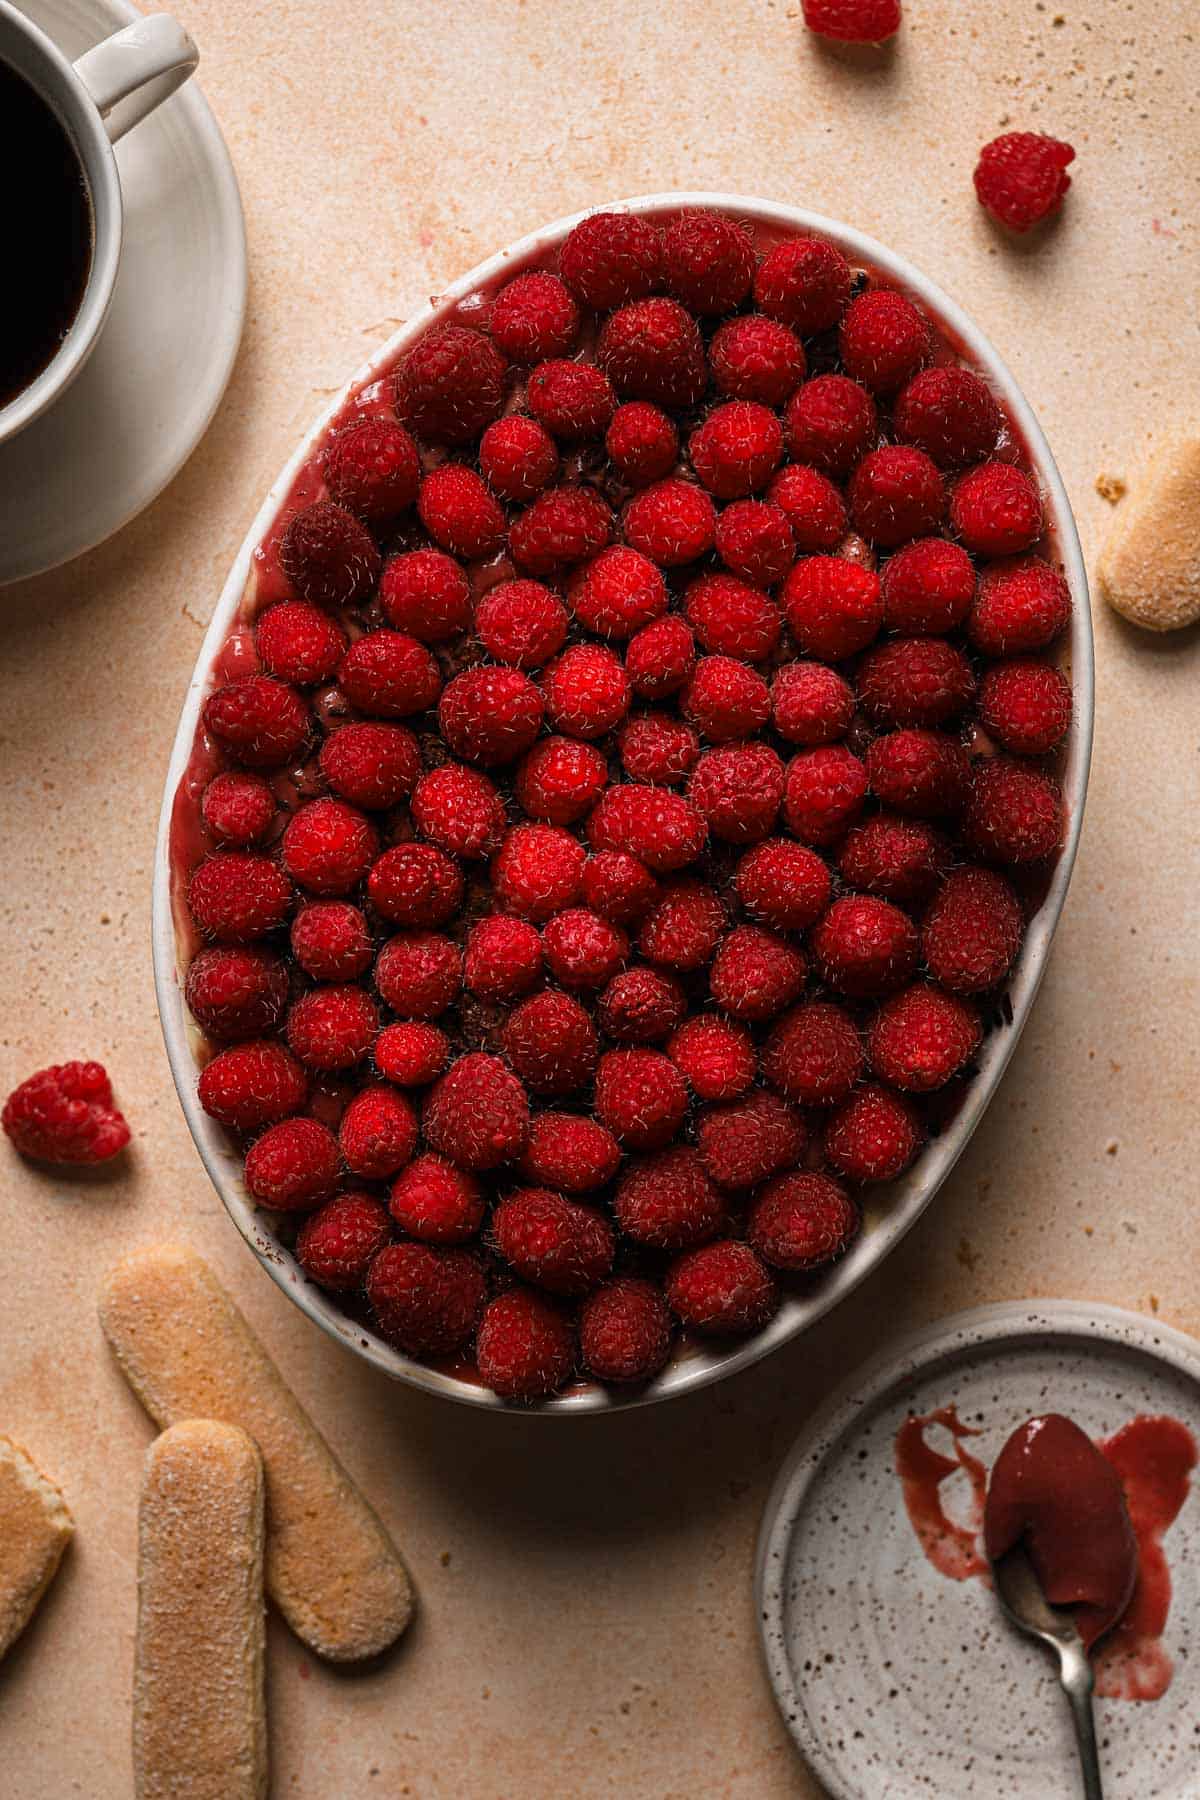 A dessert topped with fresh raspberries.